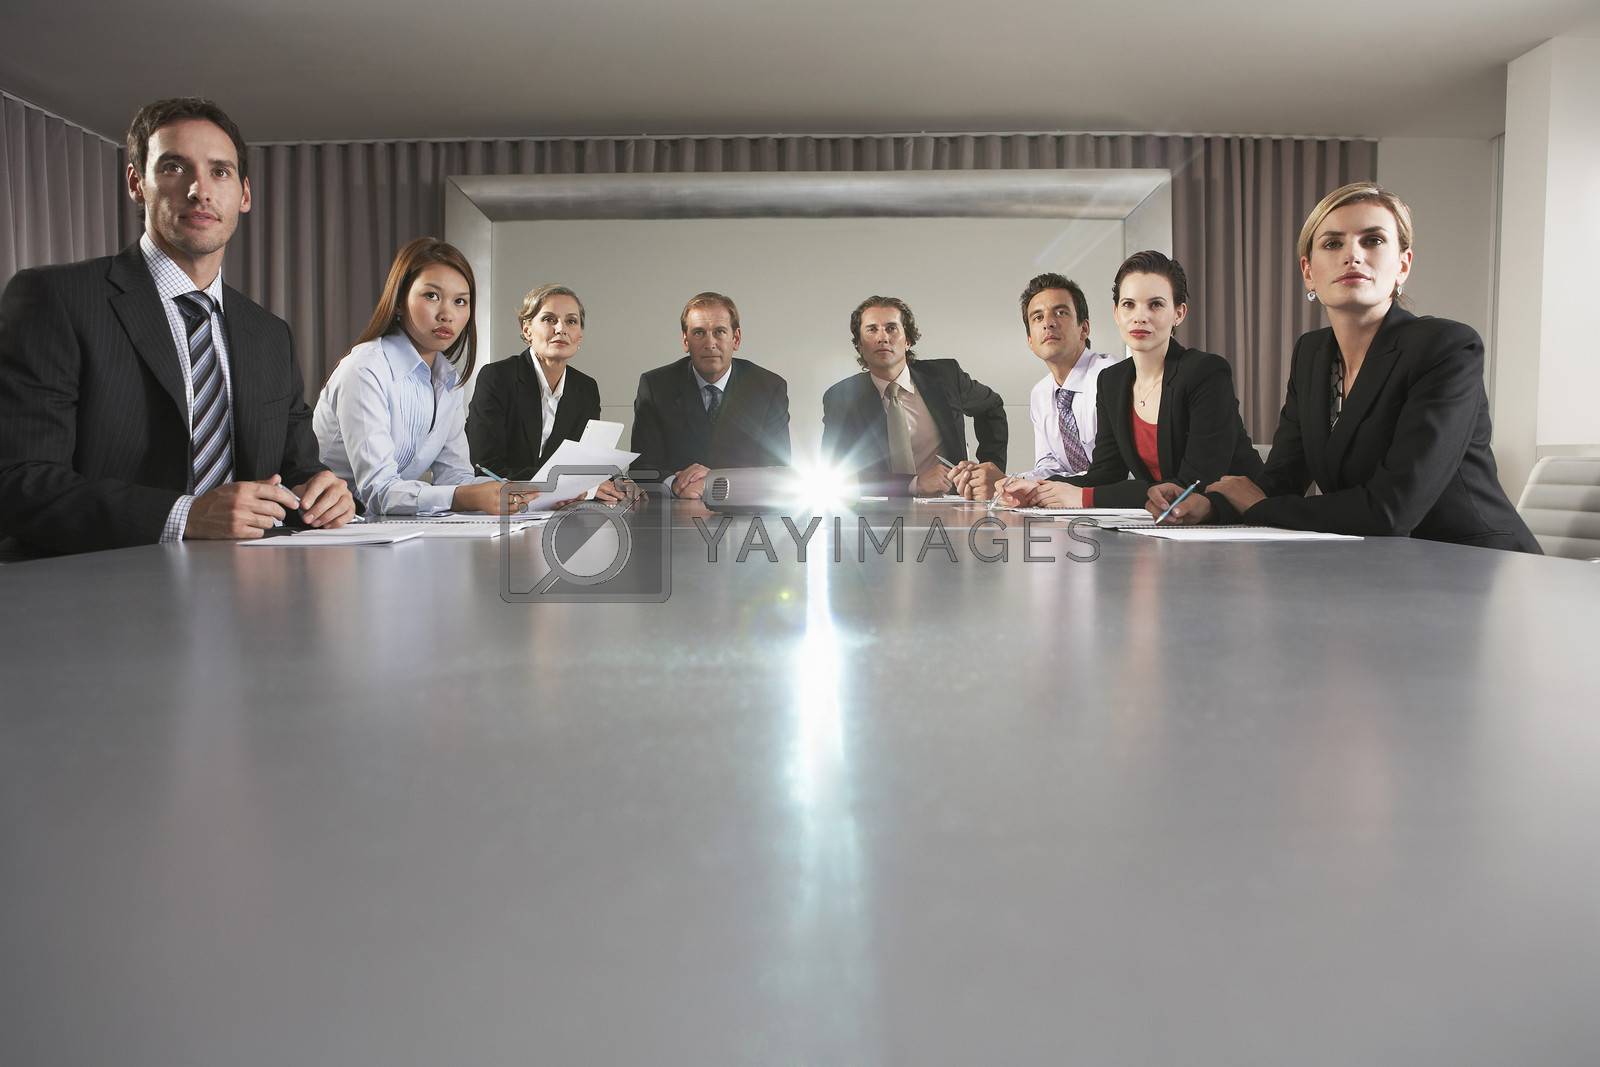 Royalty free image of Businesspeople Watching Presentation in Conference Room by moodboard